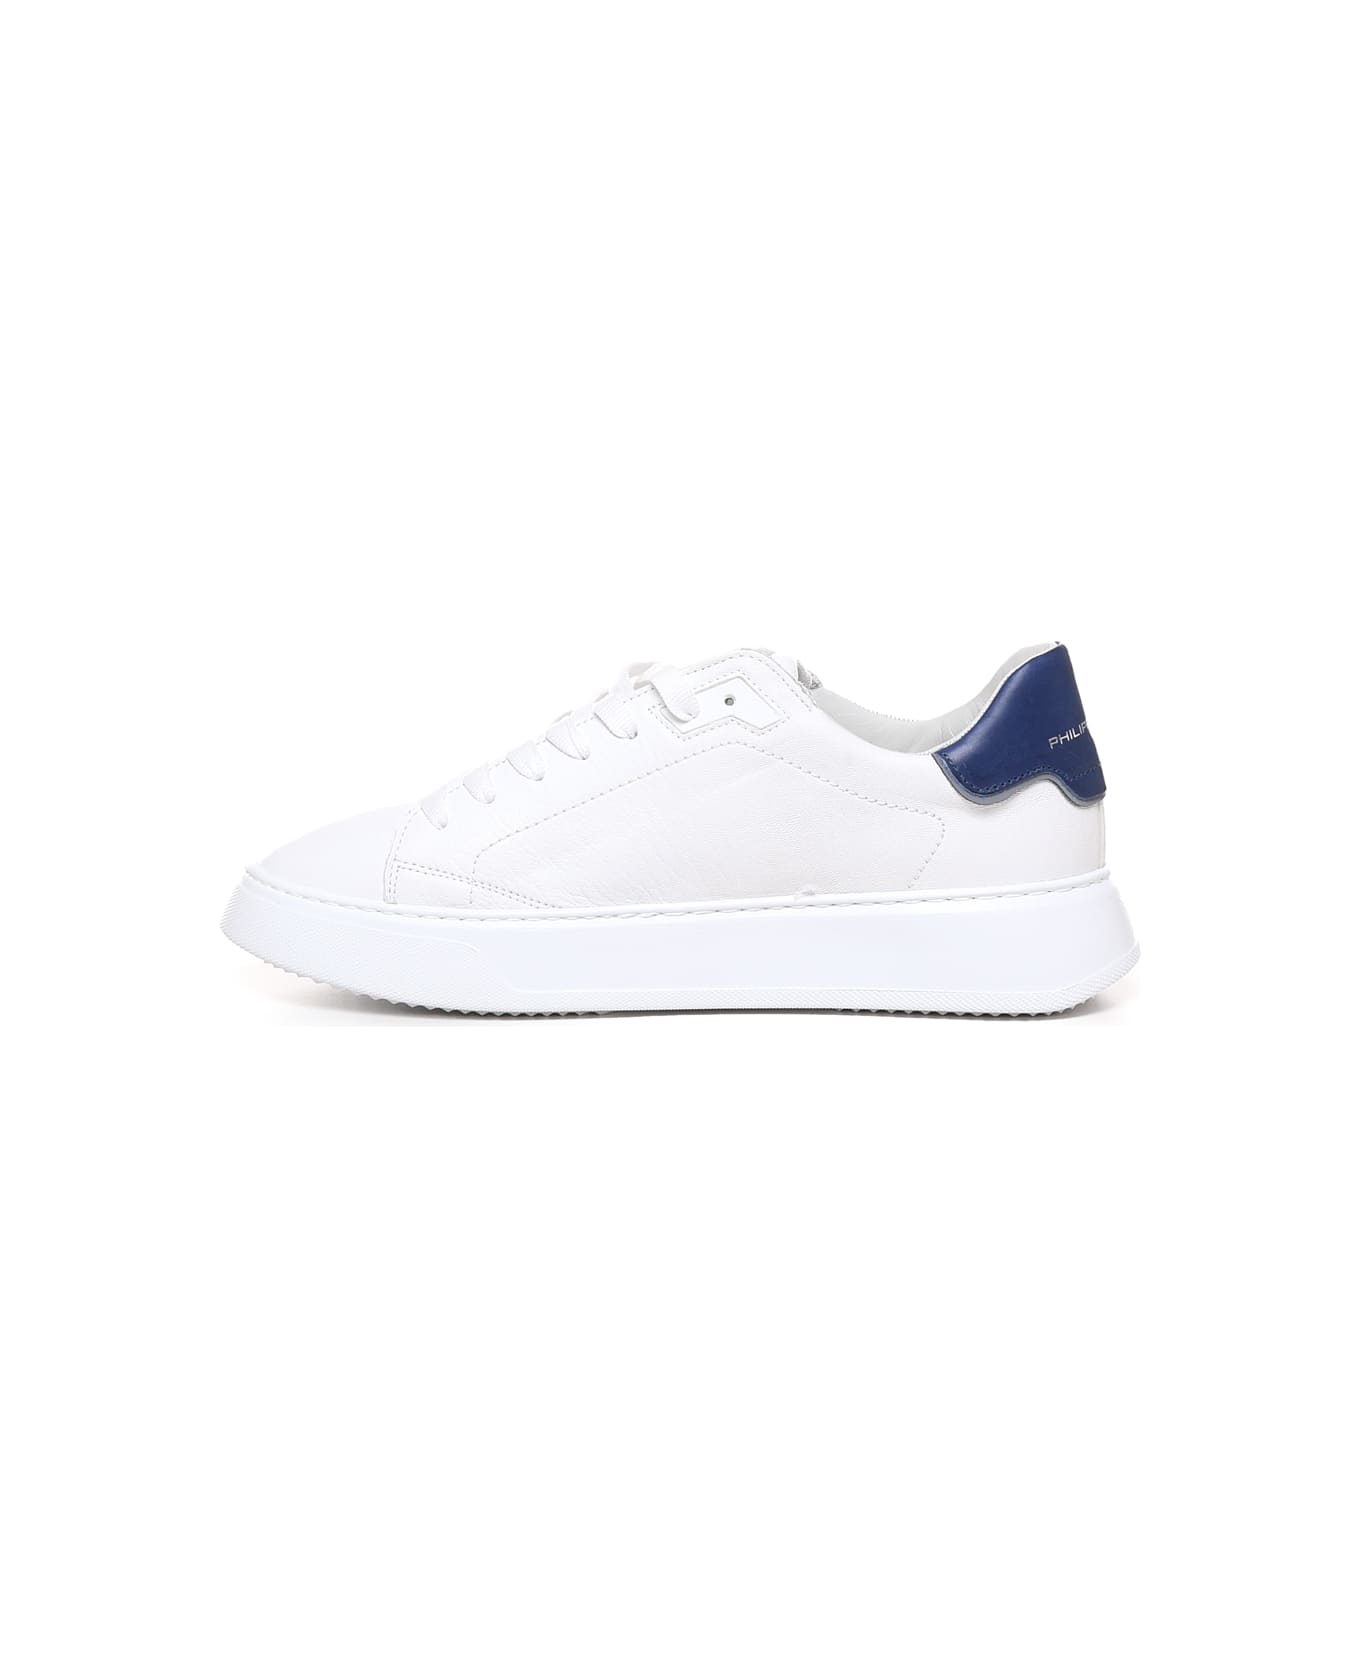 Philippe Model Paris Leather Sneakers - WHITE, blue